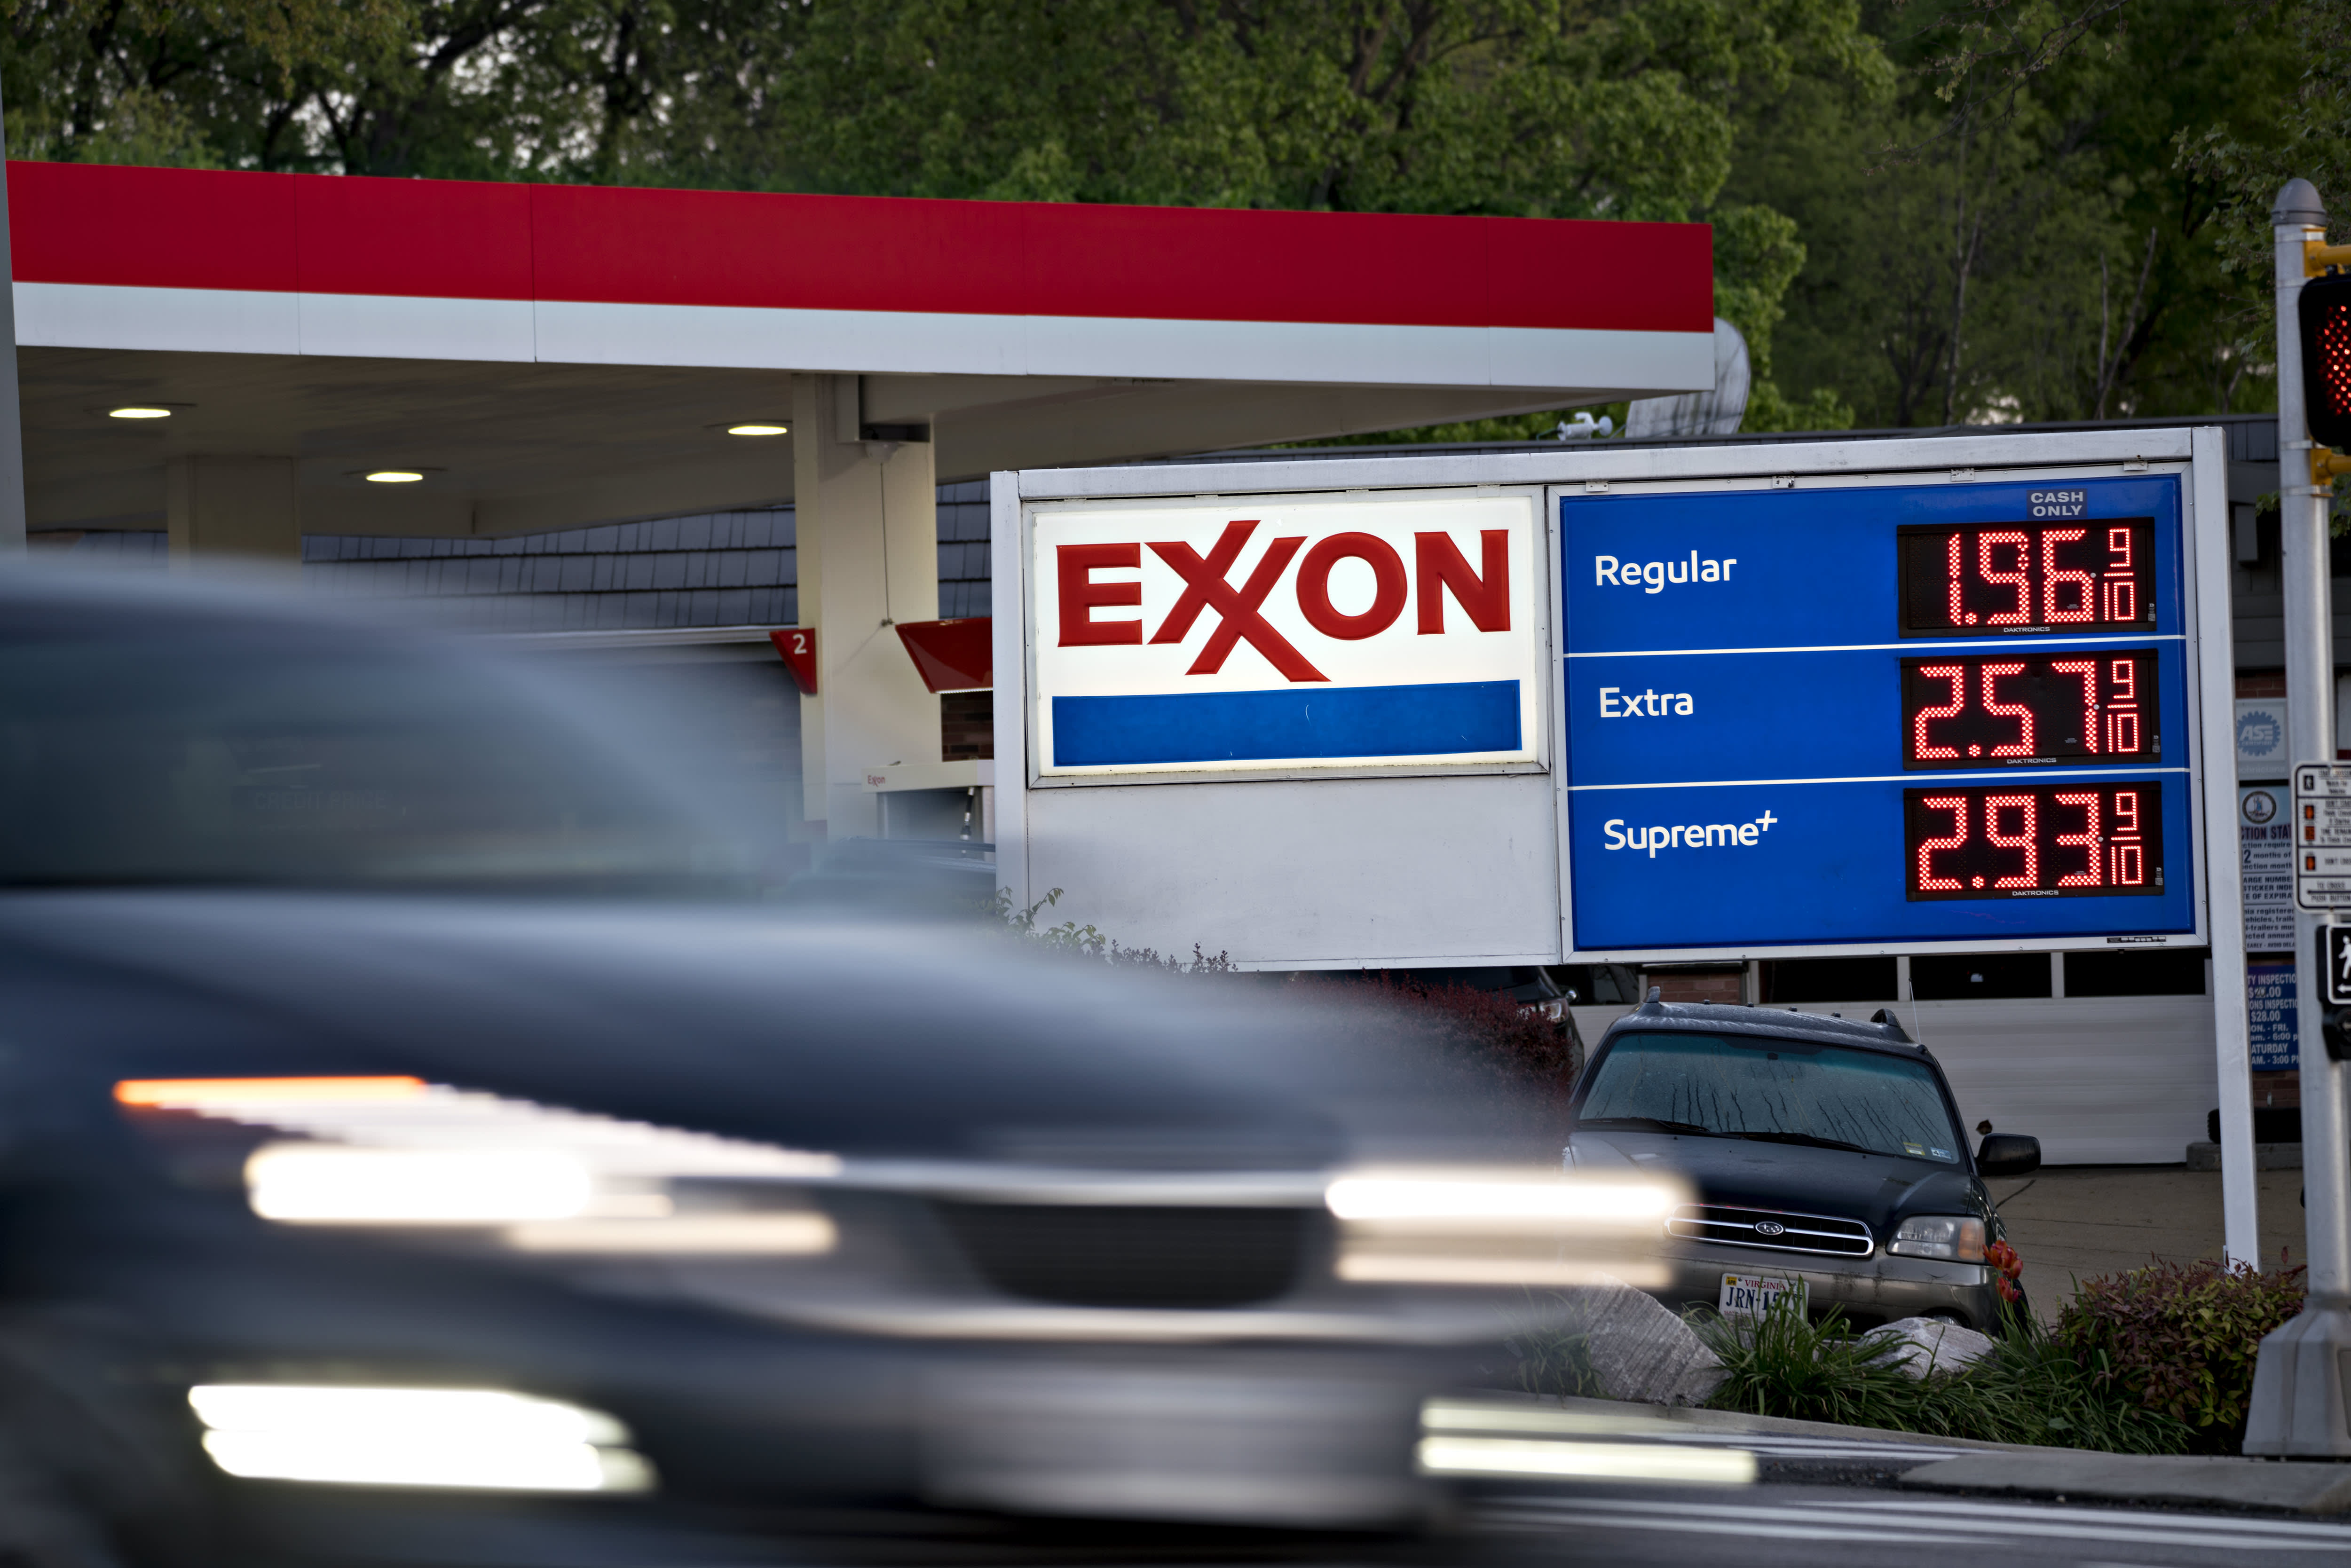 Chevron and Exxon discussed merger last year after Covid pandemic devastated oil prices, reports say - CNBC